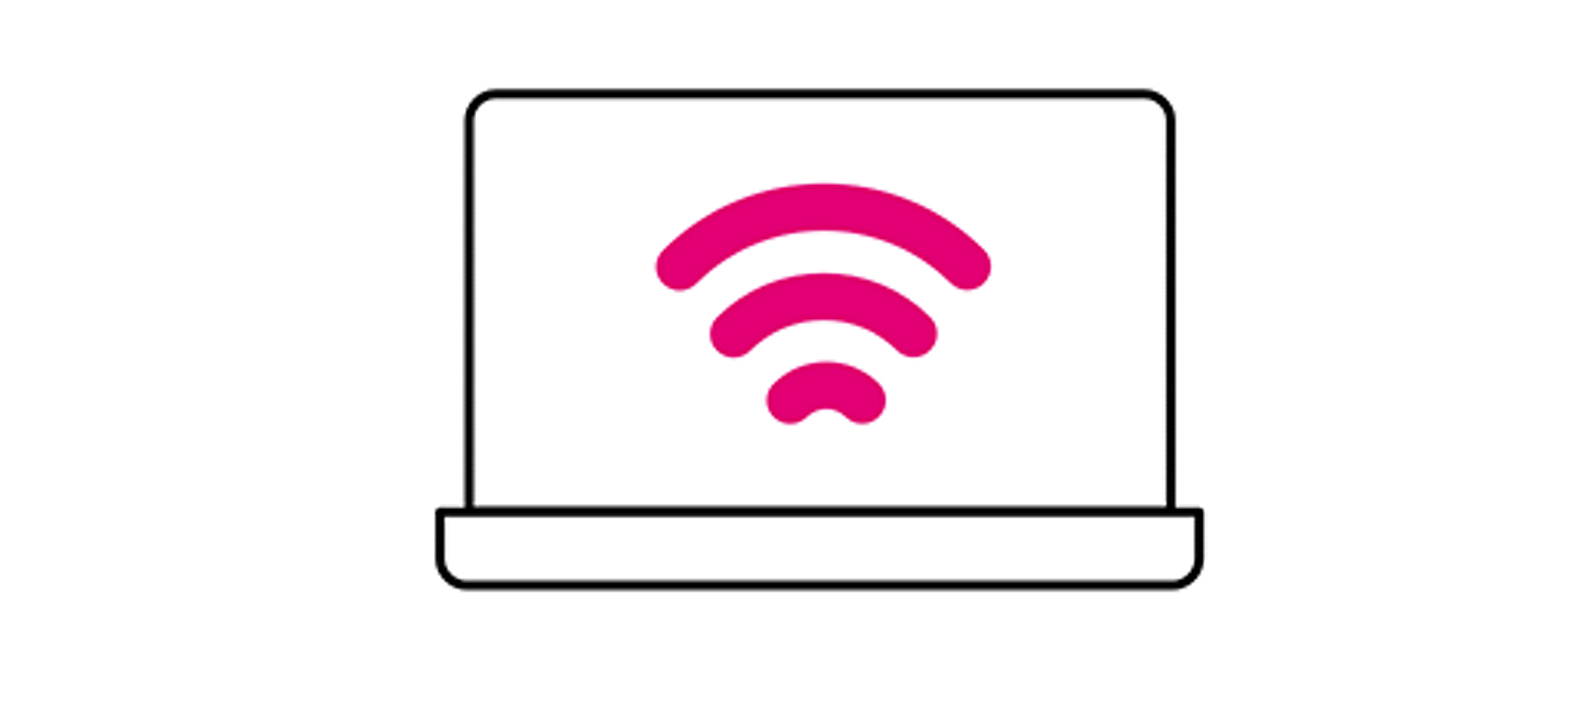 Icon of a screen with a Wi-Fi signal on it